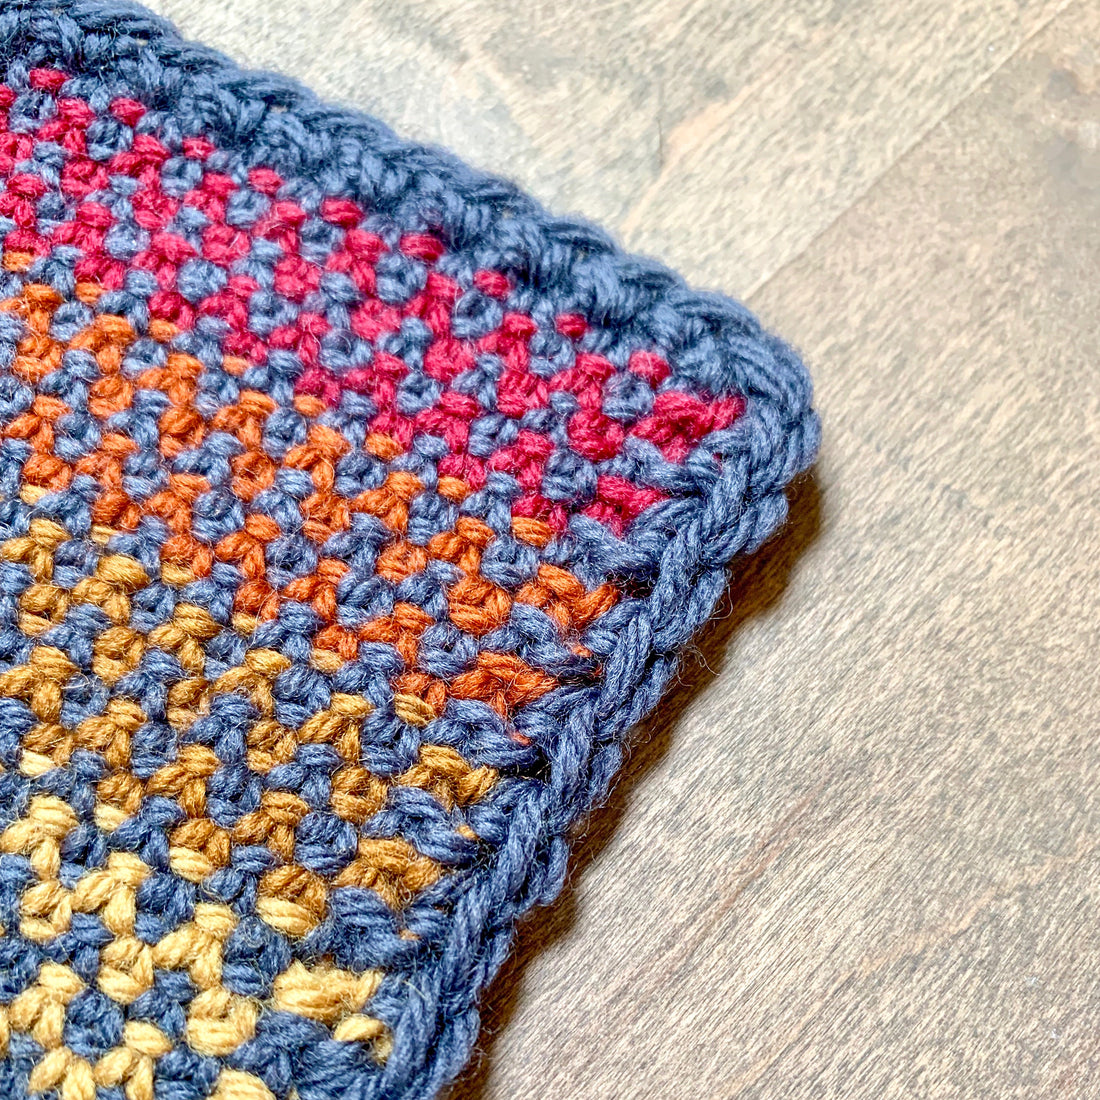 How to Combine Knitting and Crochet in the Same Project – Camp Stitchwood